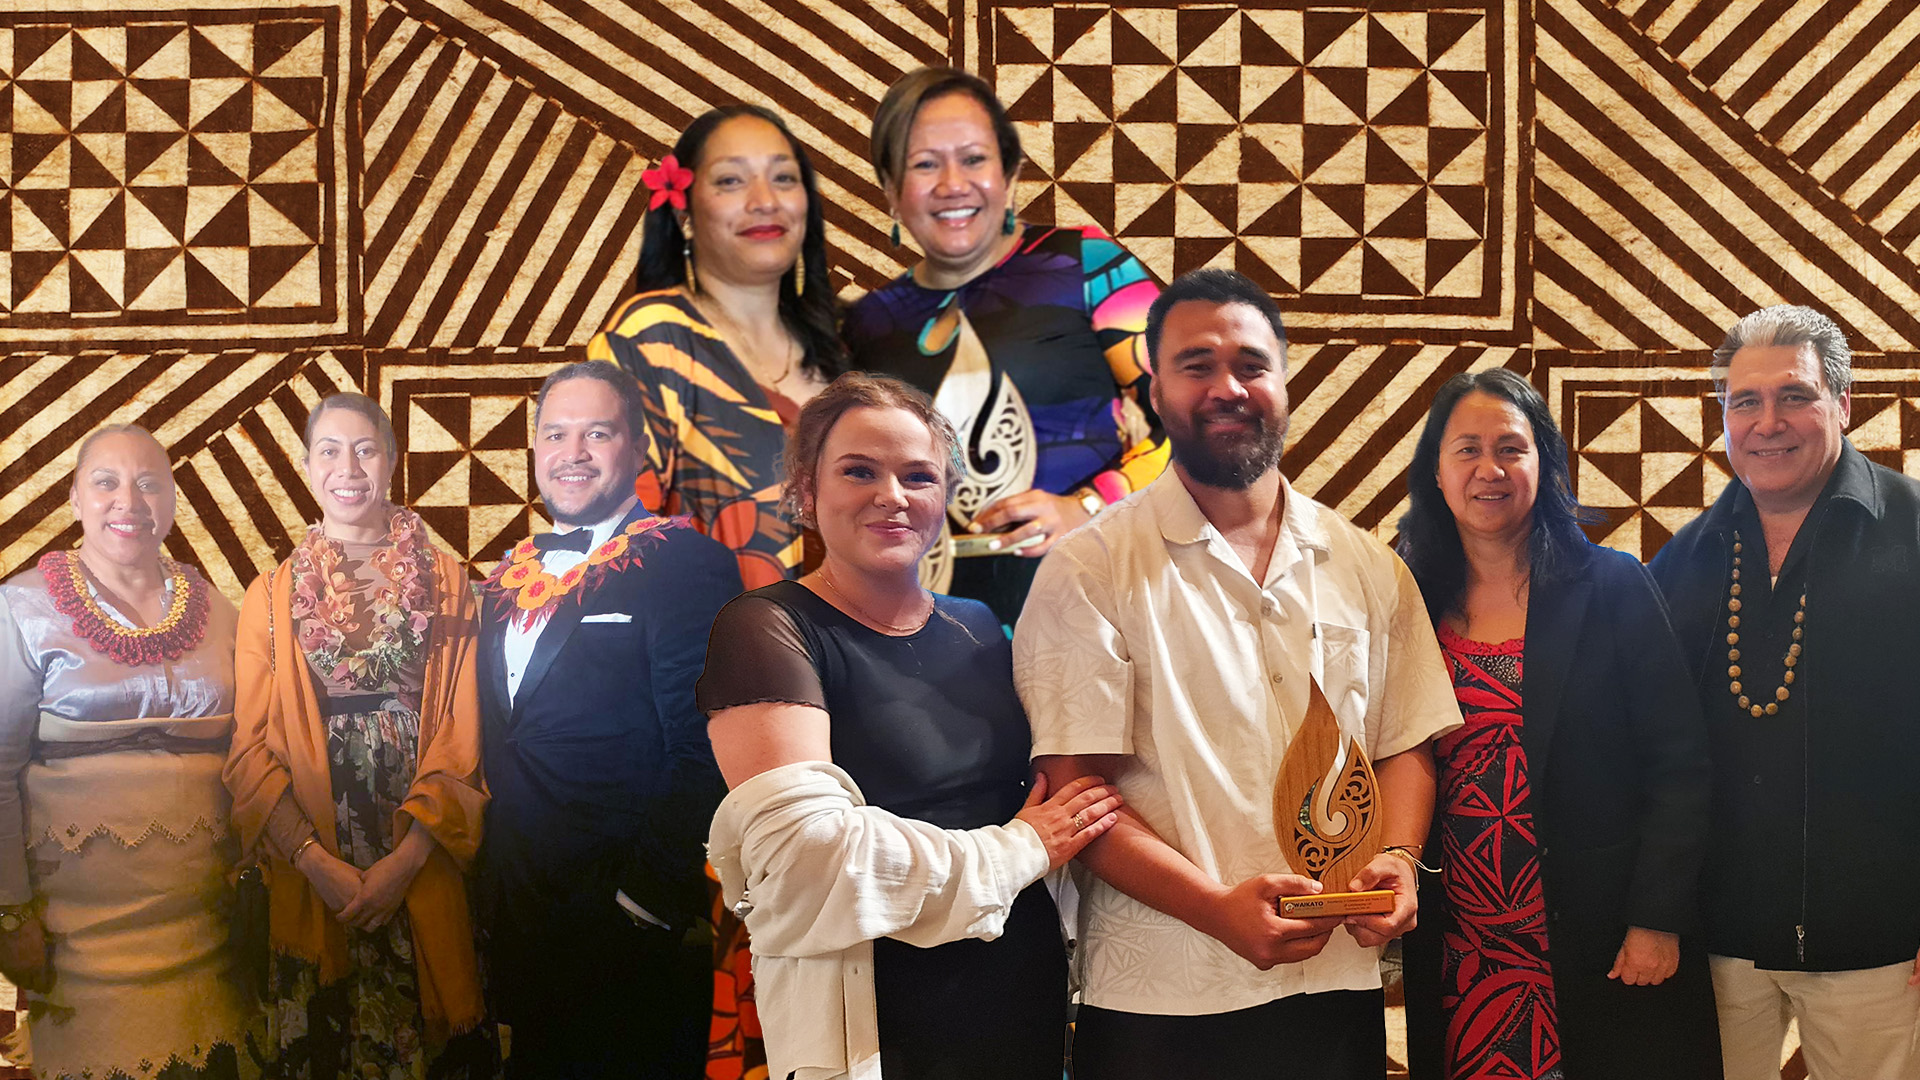 Waikato region celebrates Pacific Business excellence with inaugural event